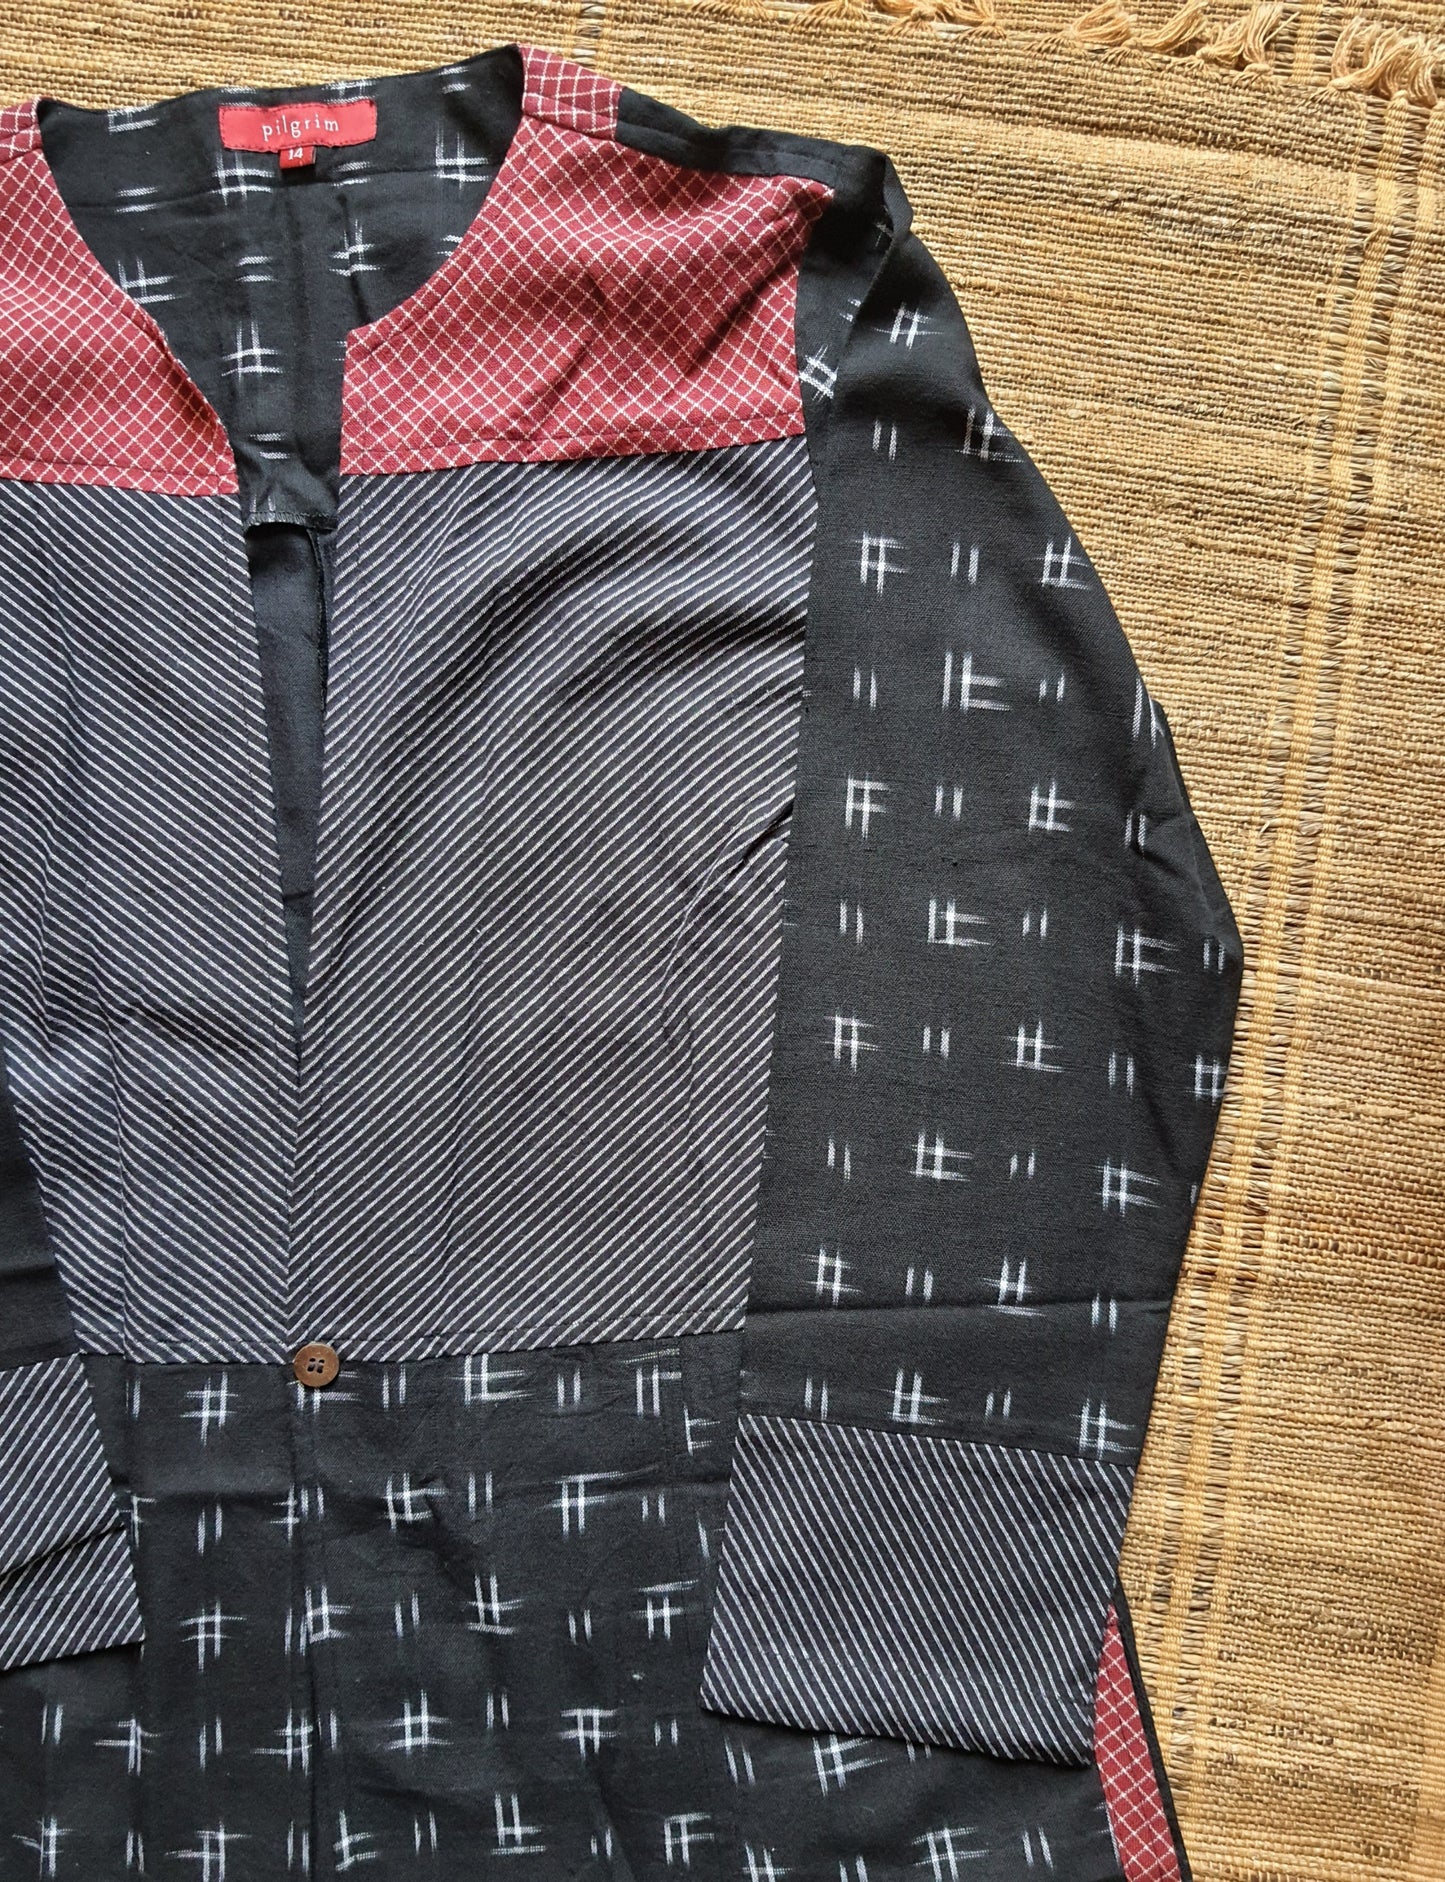 Mridul Jacket - Black Ikkat, Black Cotton and Red Checked